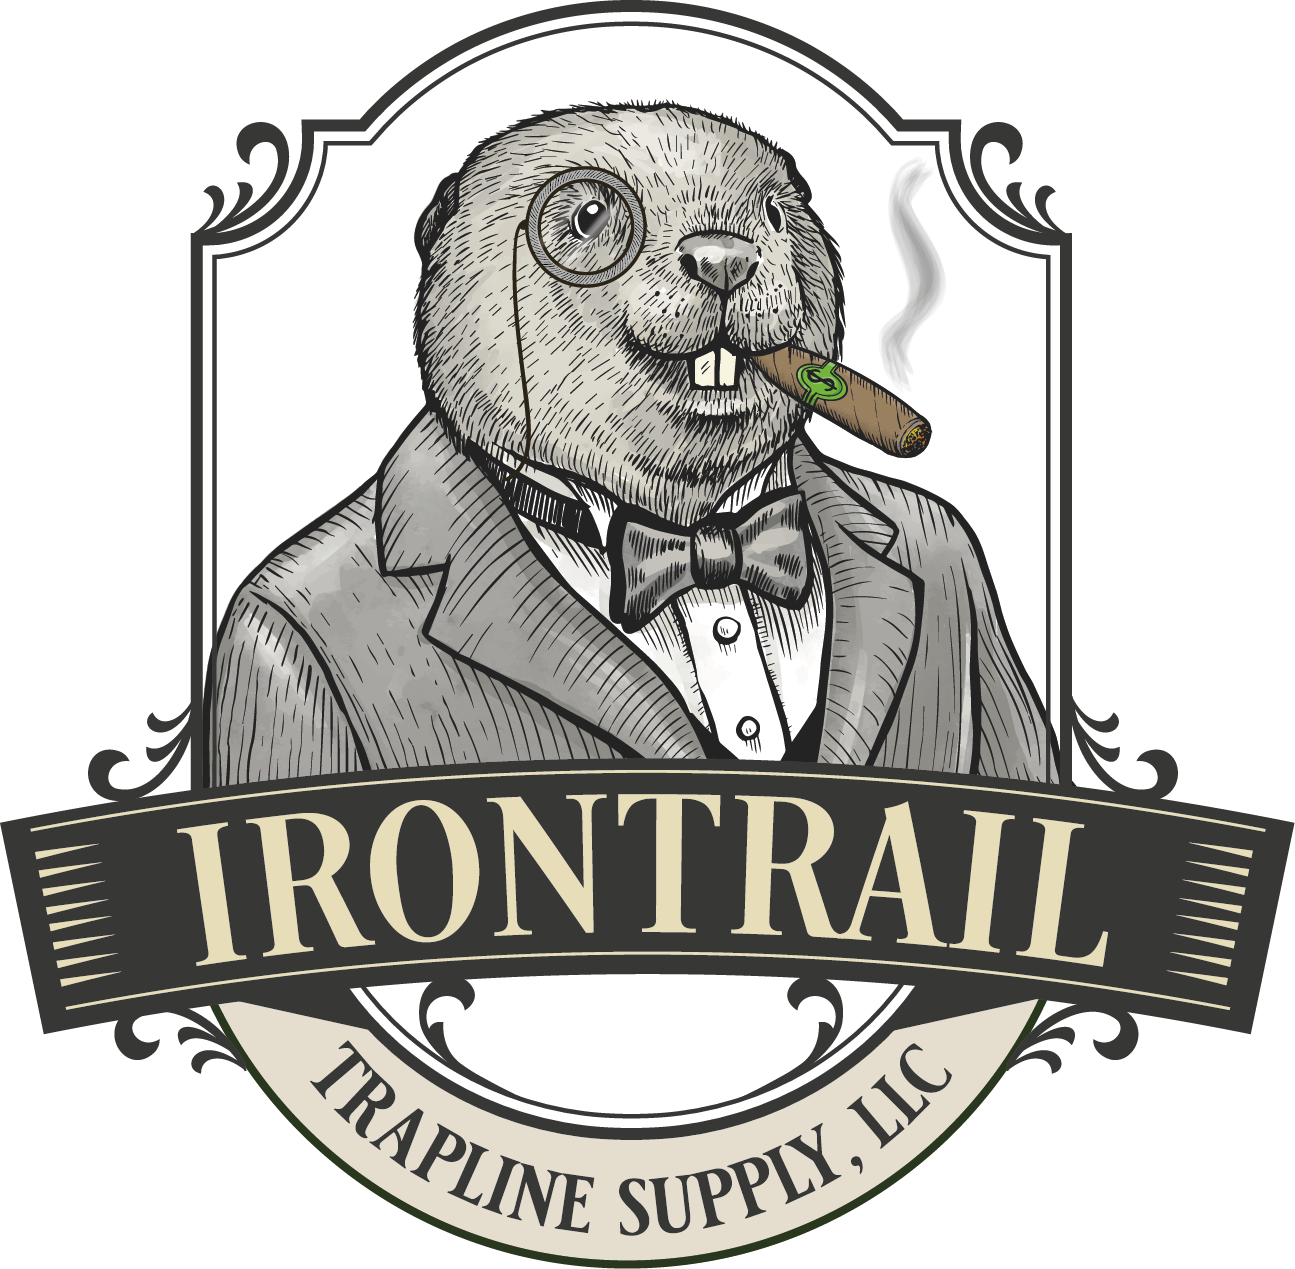 Trapping Lures - IronTrail Trapline Suppy – IronTrail Trapline Supply, LLC